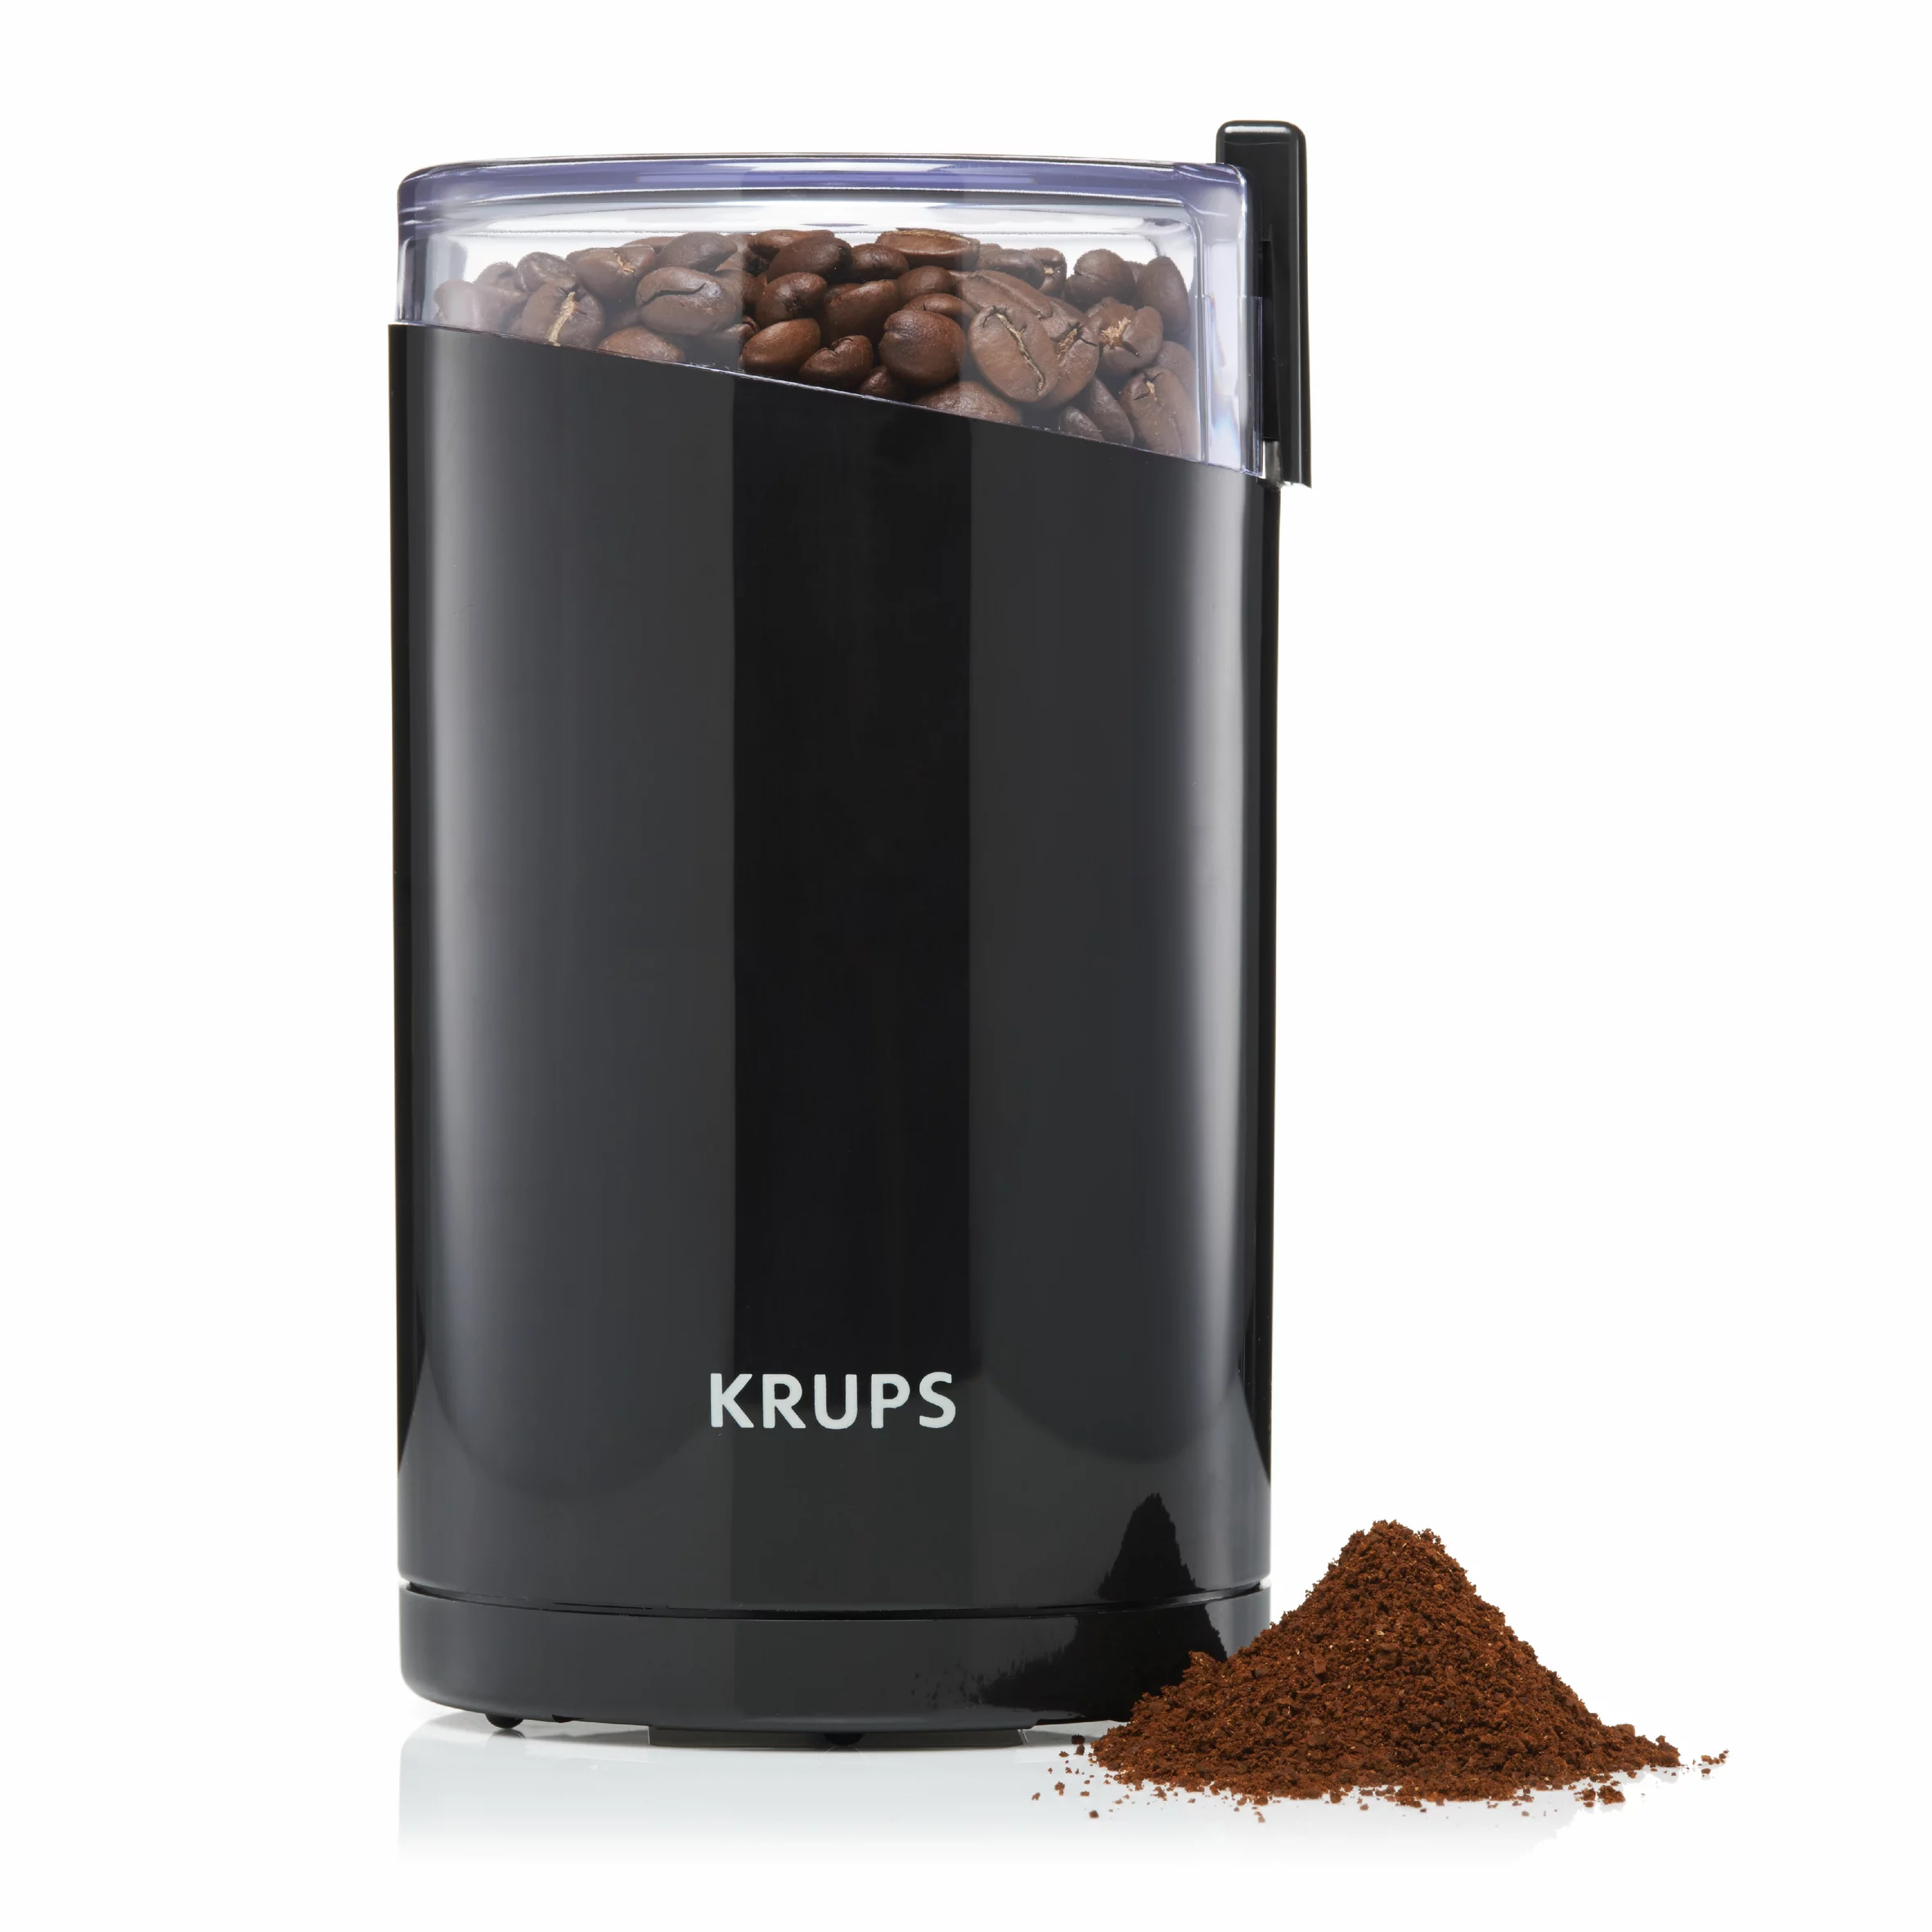 KRUPS New Fast Touch Electric Coffee and Spice Grinder with Stainless Steel Blades, Black